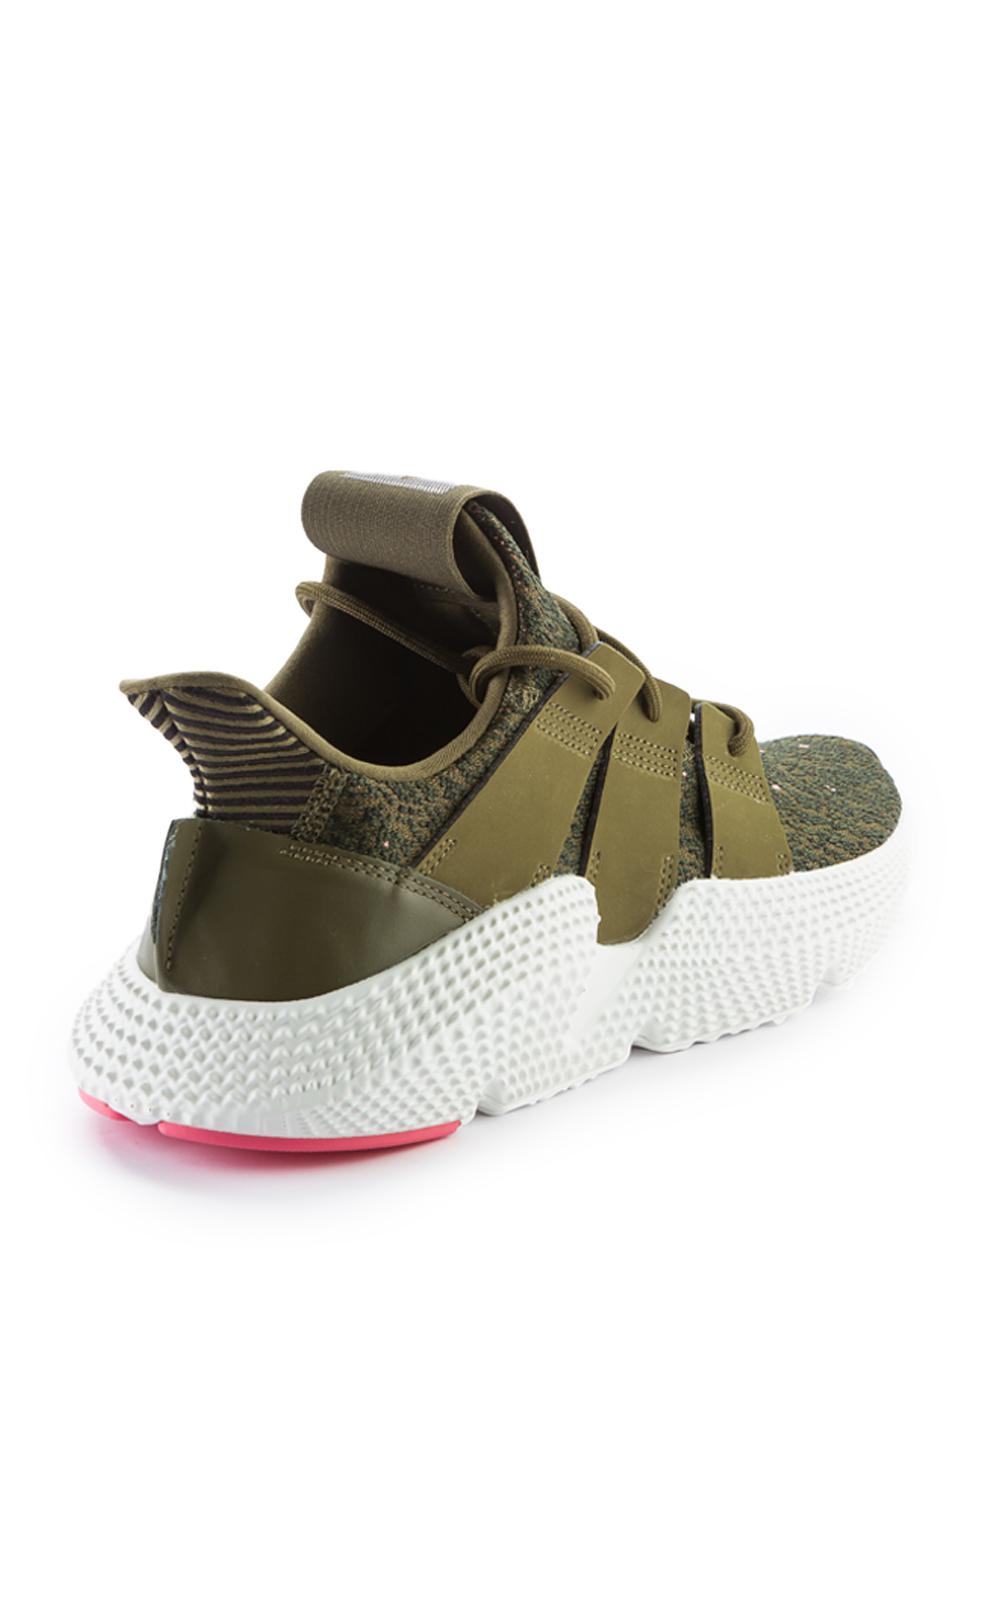 adidas Originals Prophere Olive in Green for Men - Lyst